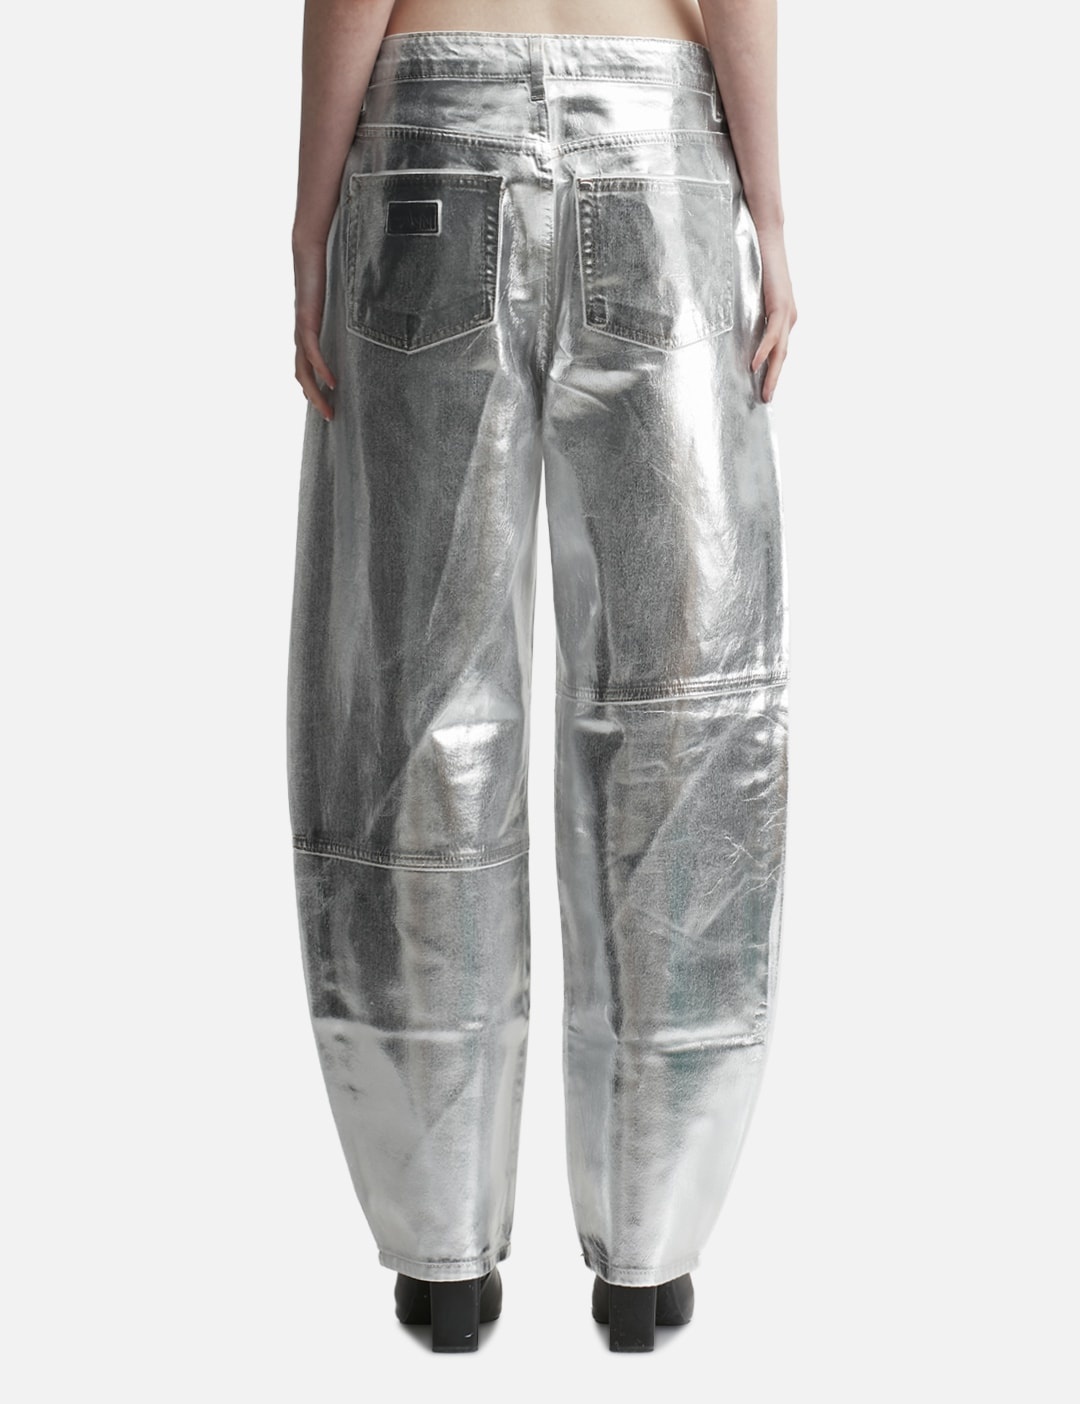 SILVER FOIL STARY JEANS - 3